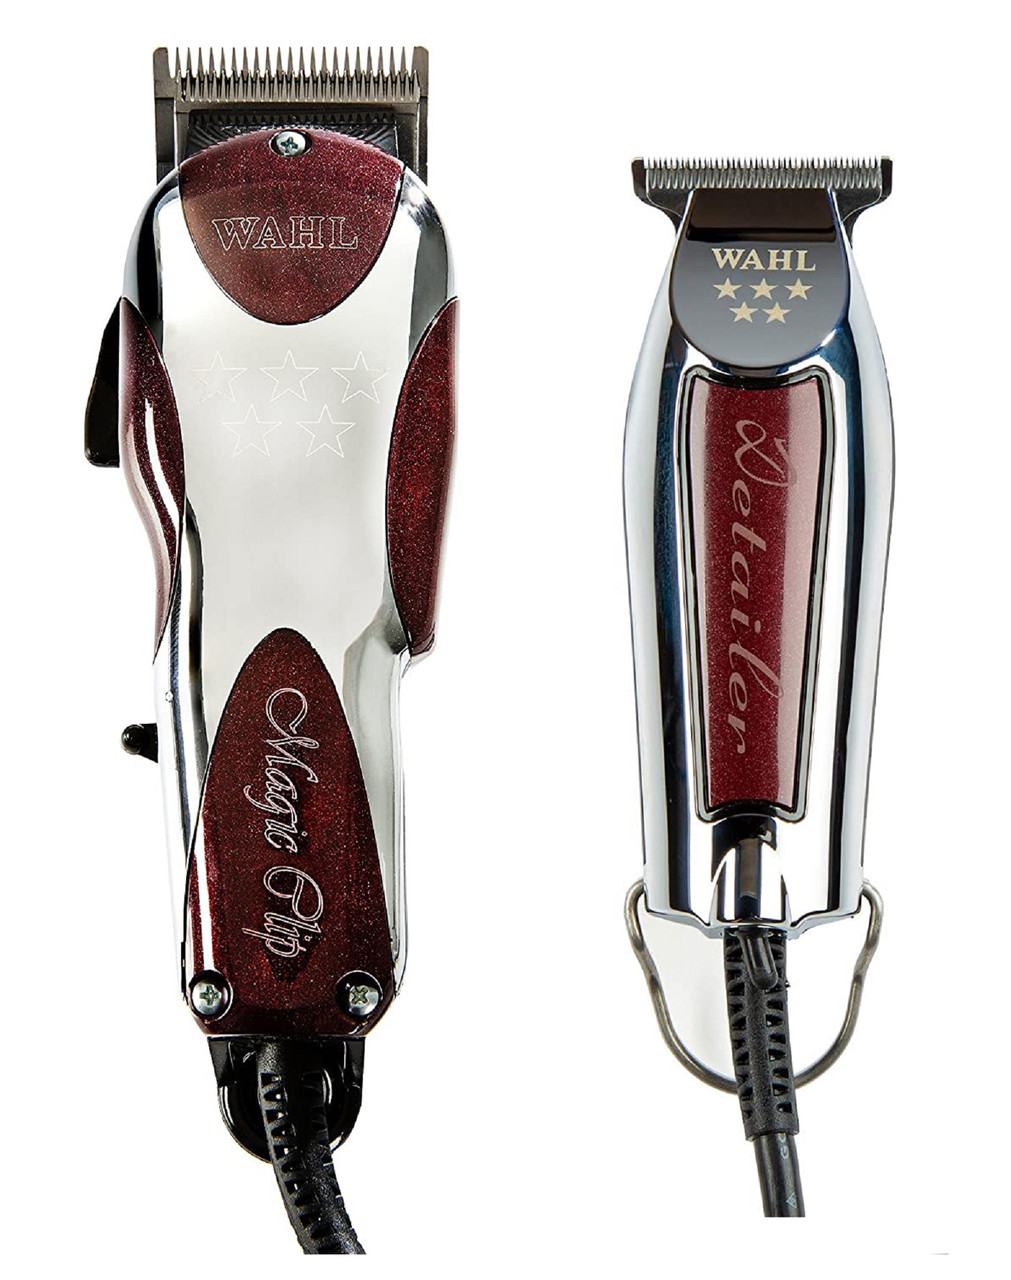 Wahl Corded Magic Clipper and Trimmer Combo - Barber Salon Supply